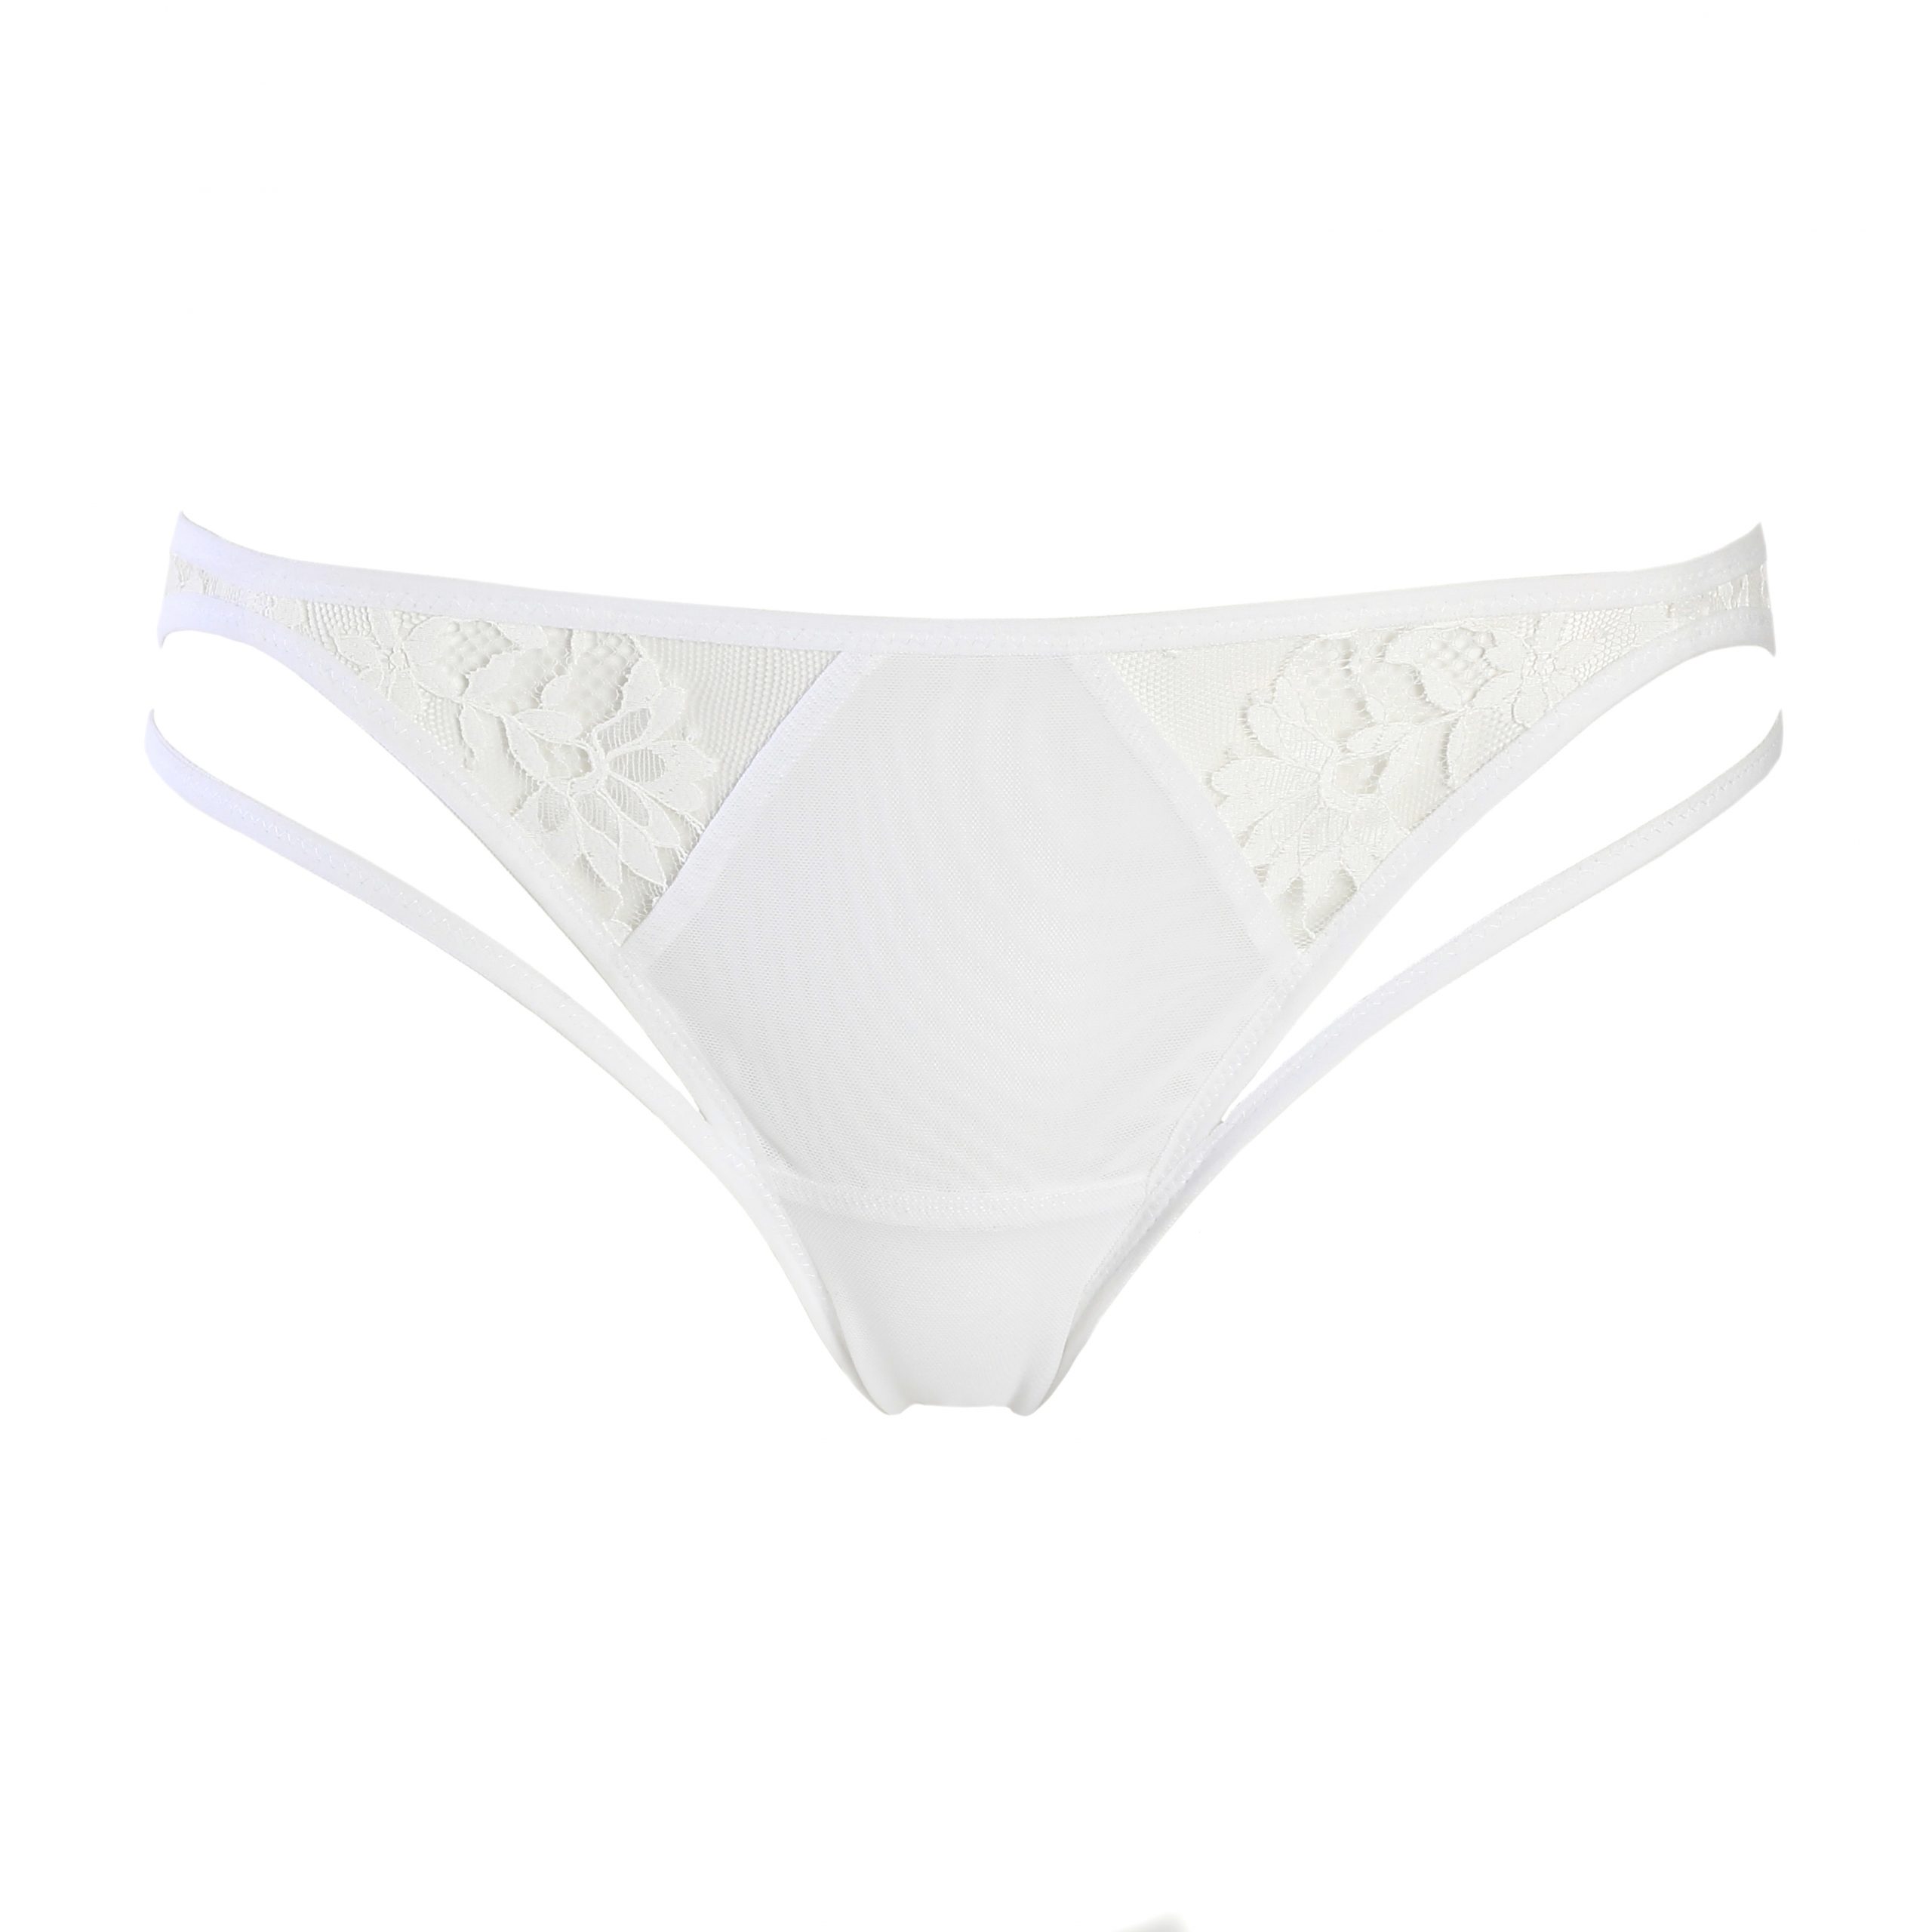 White Mesh Panties with Lace and Leg Straps by Flash you and me